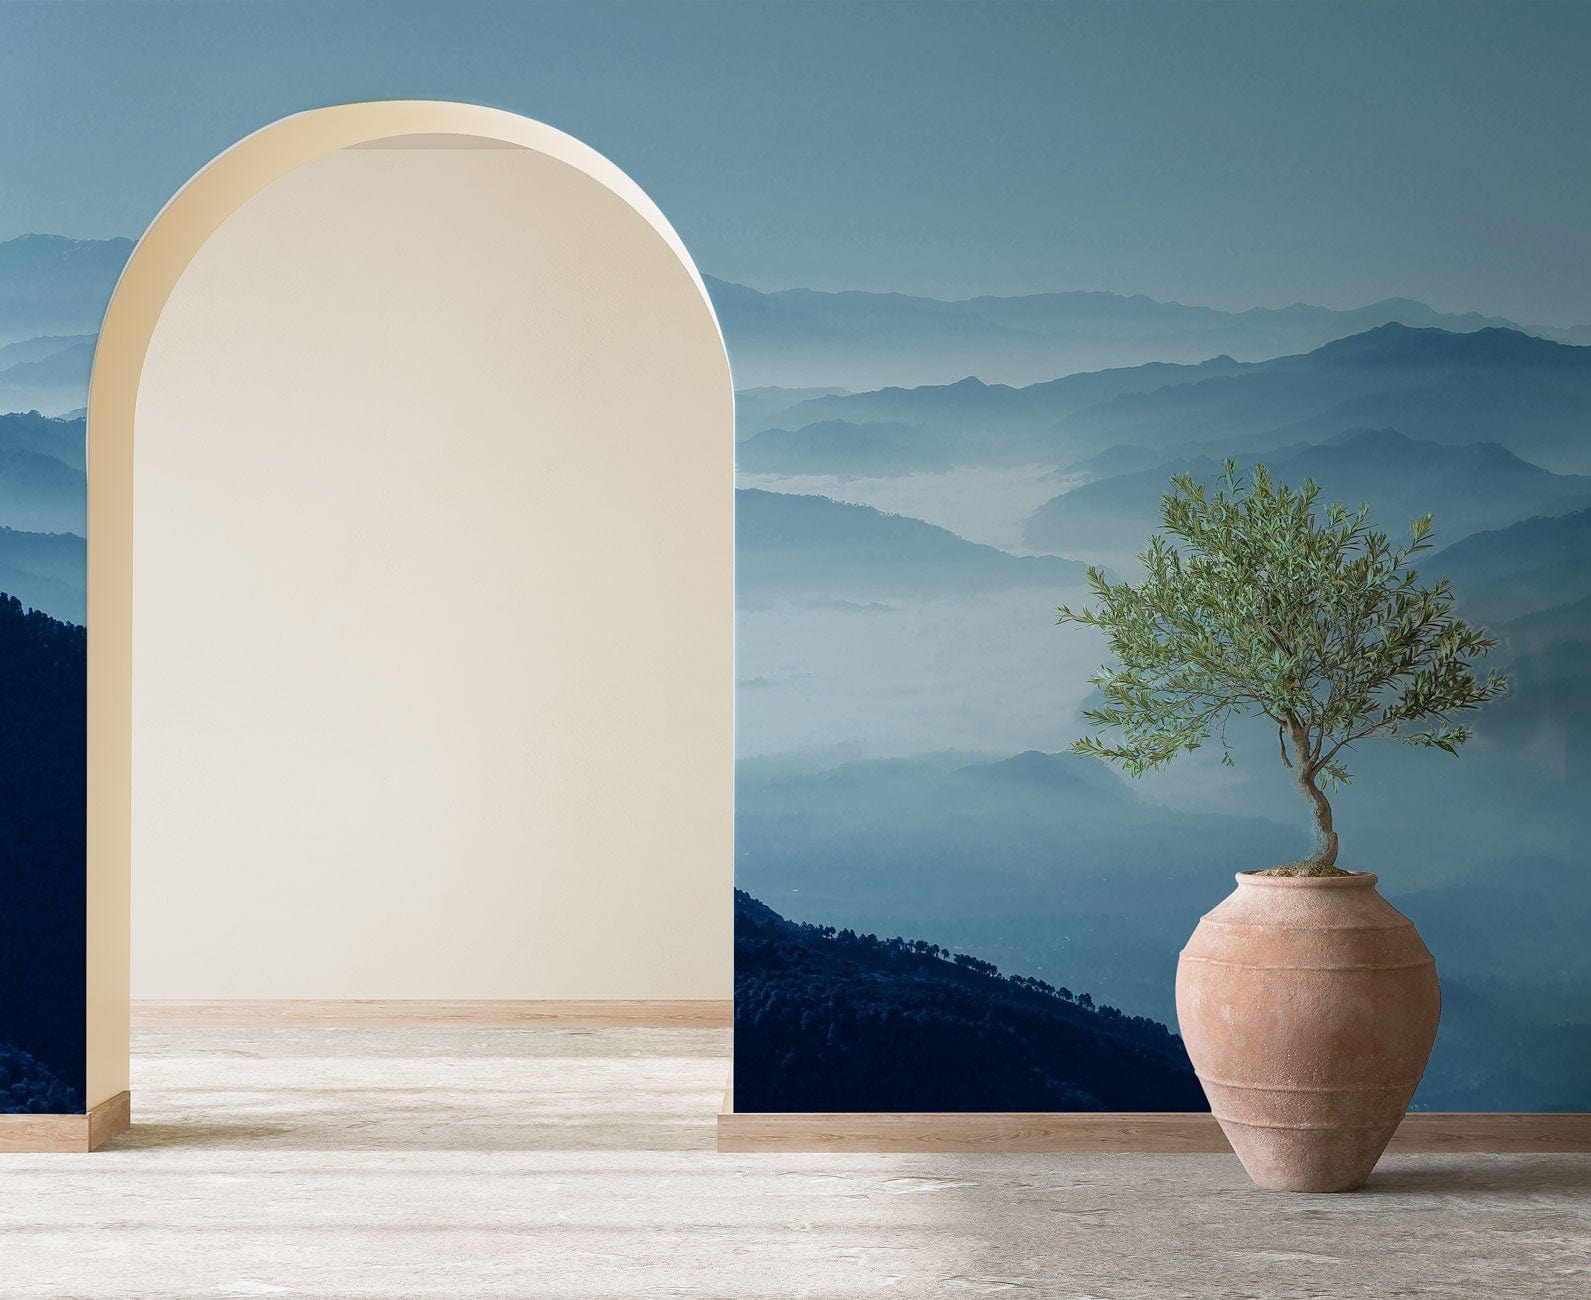 Wallpaper mural featuring rolling misty mountains for use as a hallway decoration